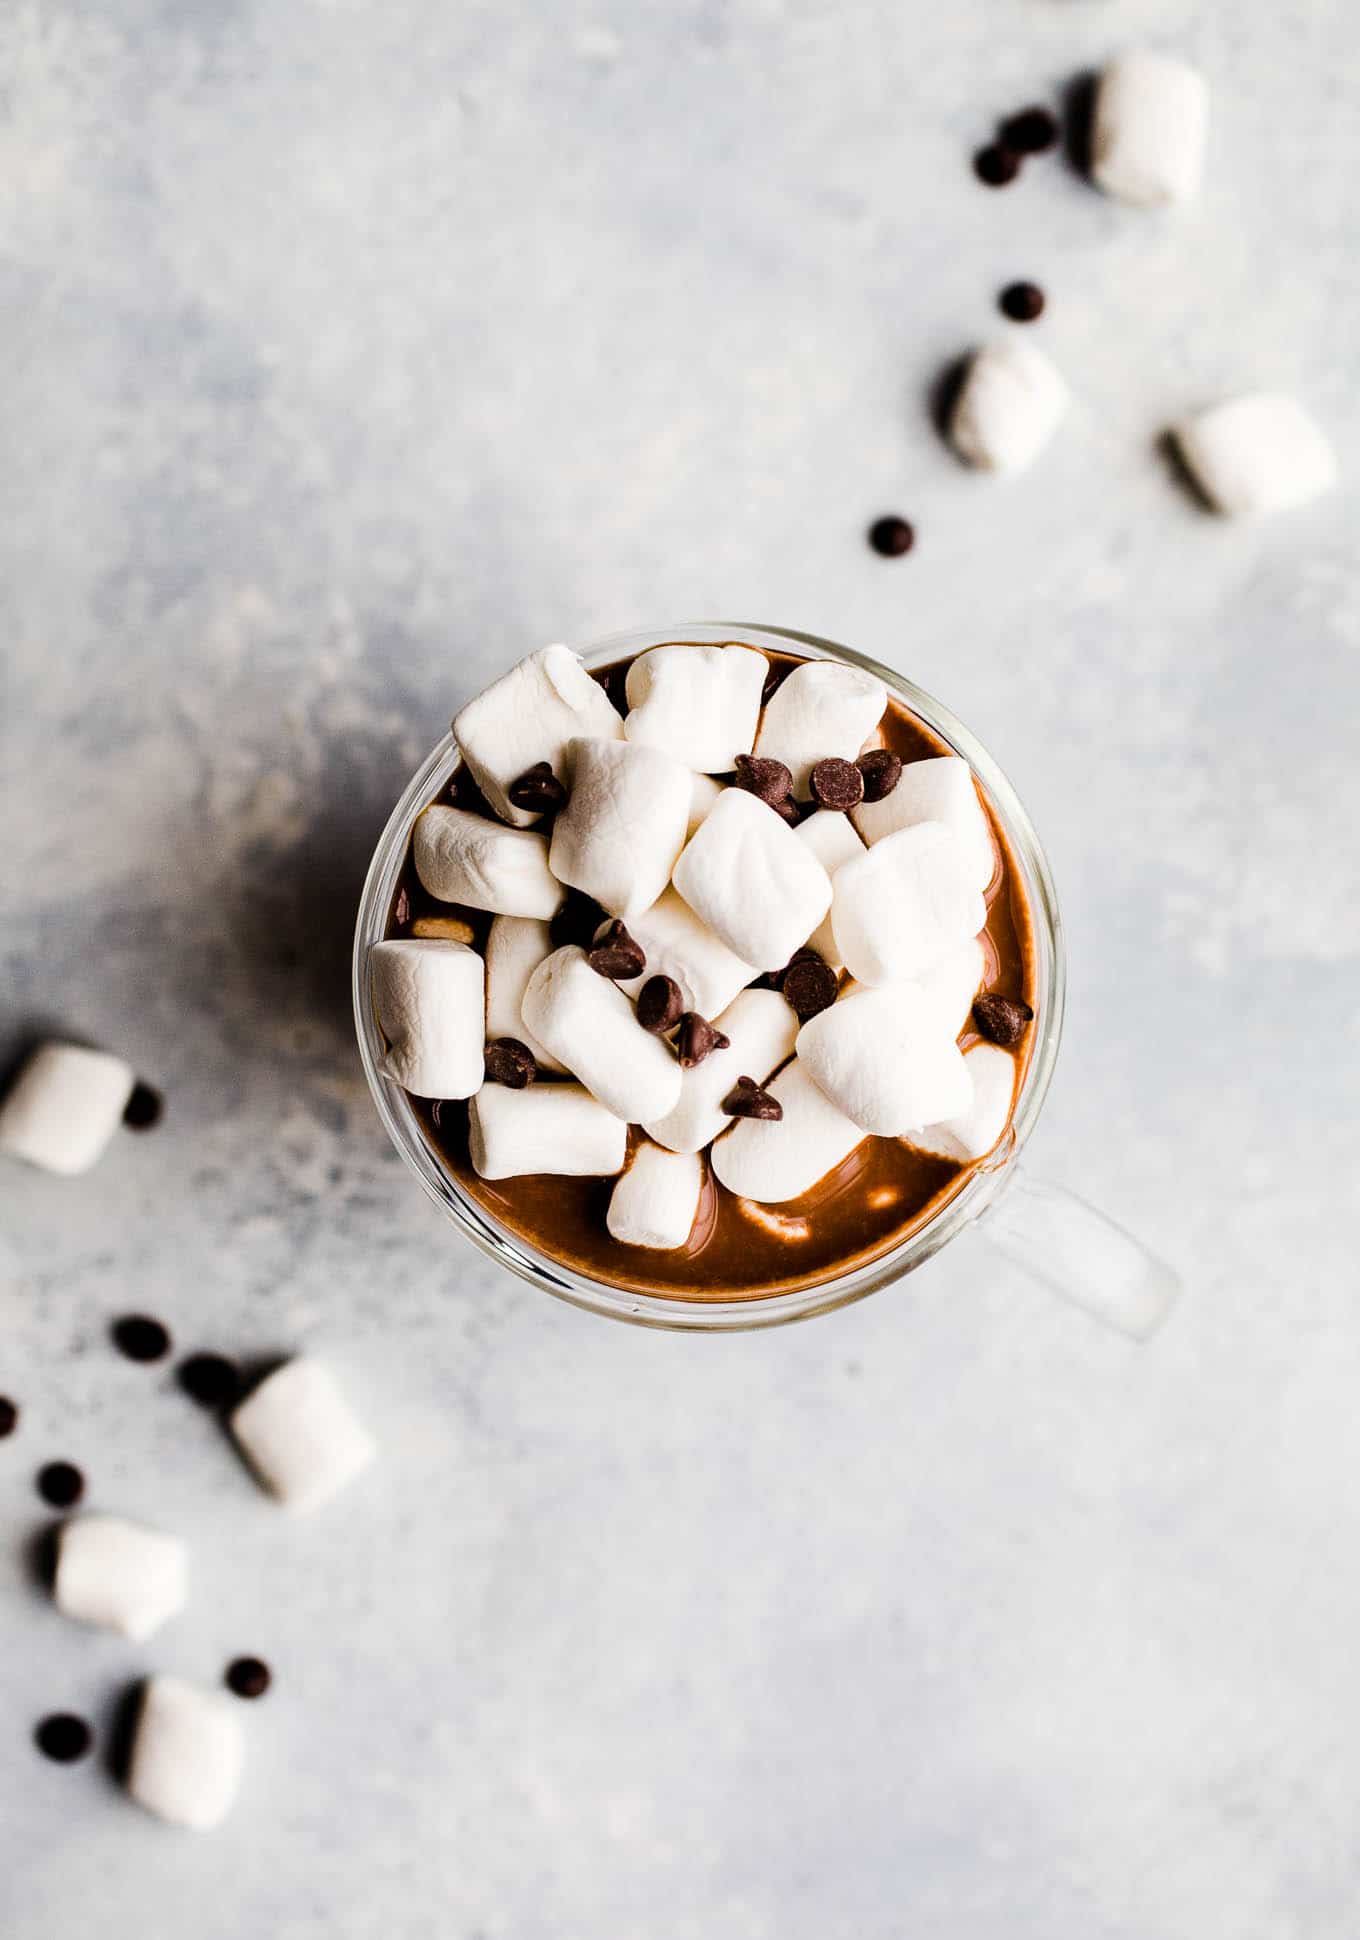 hot chocolate with marshmallows and chocolate chips